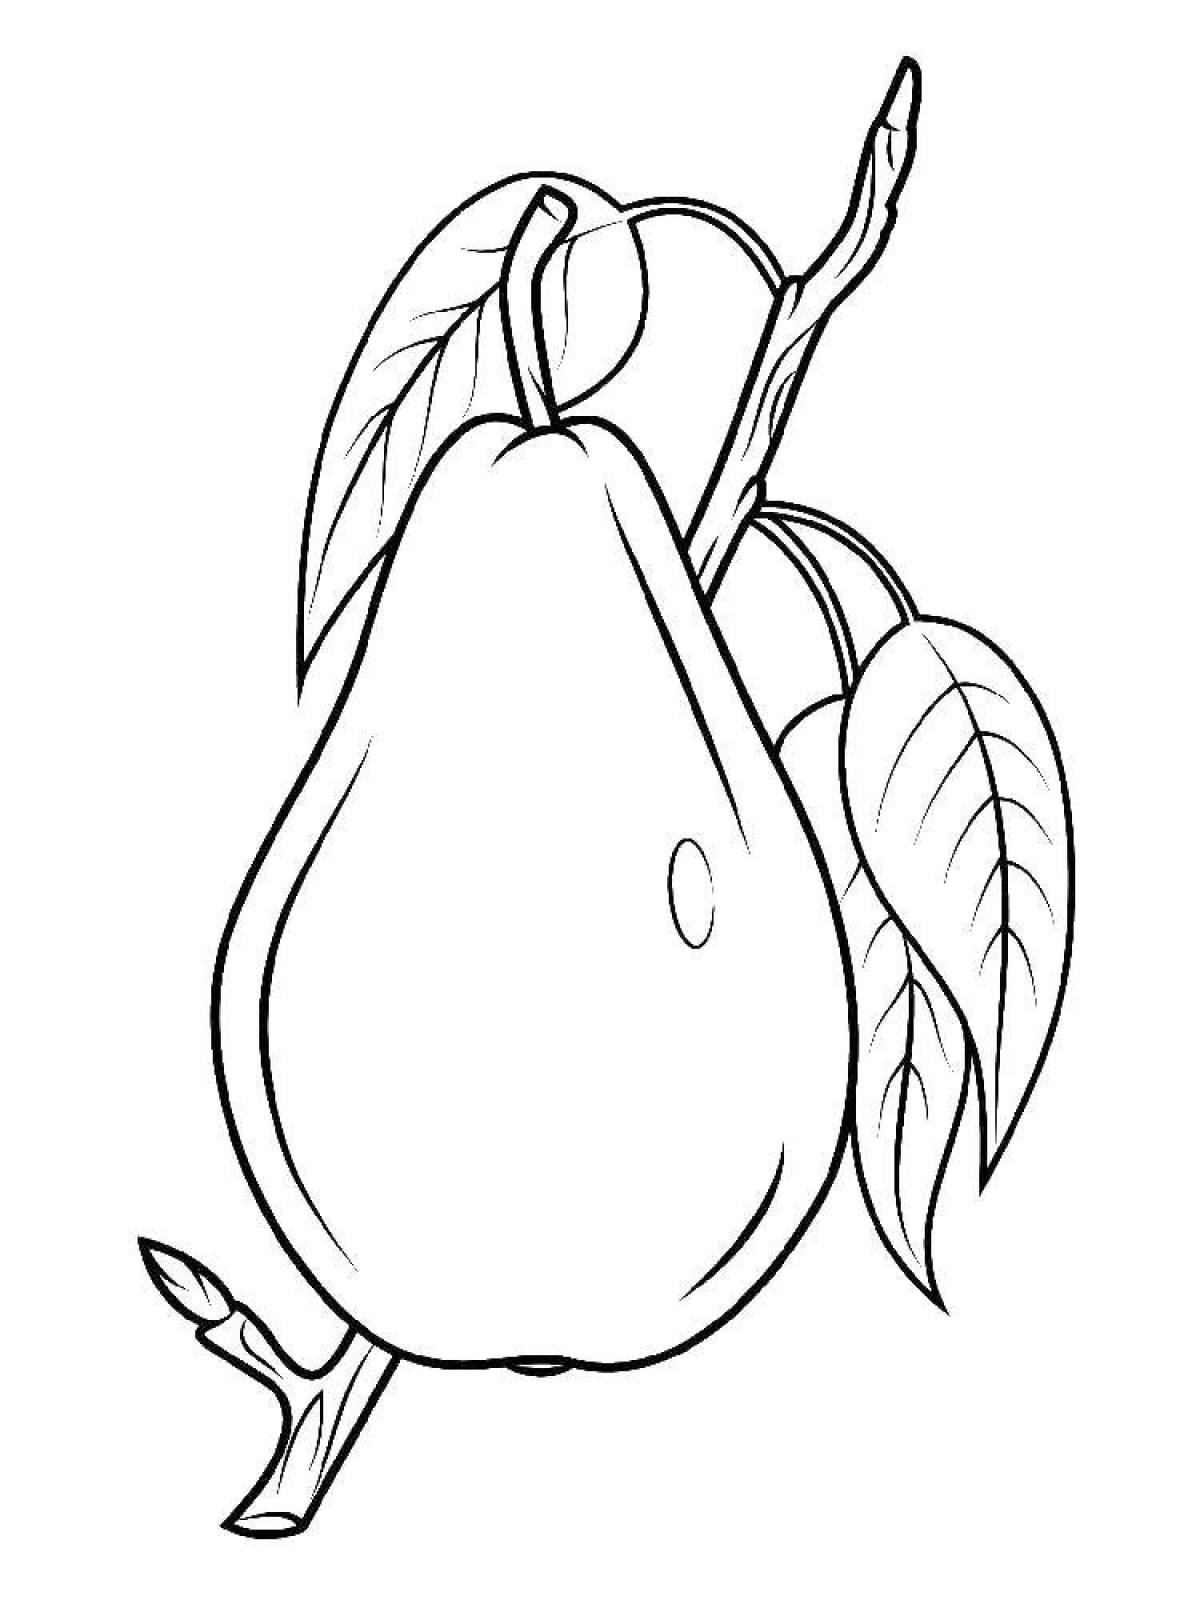 Coloring pear